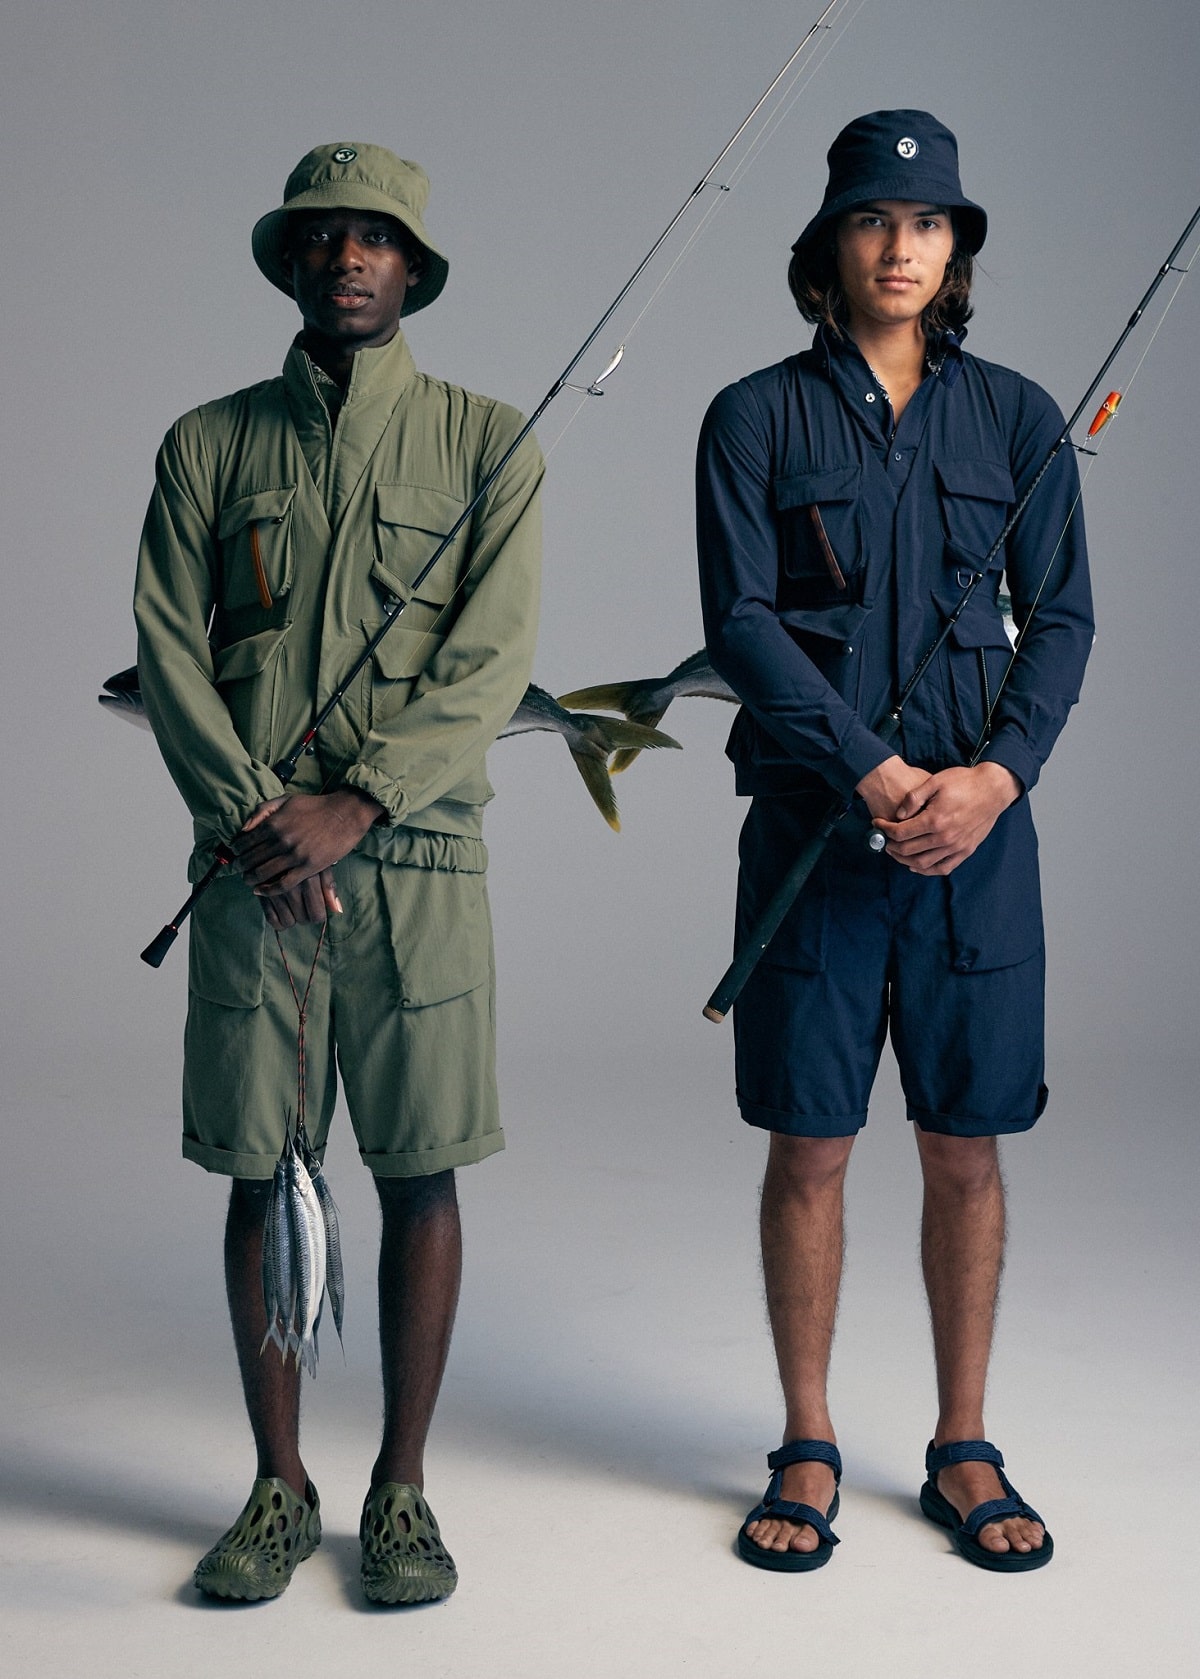 What’s Behind Fishing-Inspired Menswear?